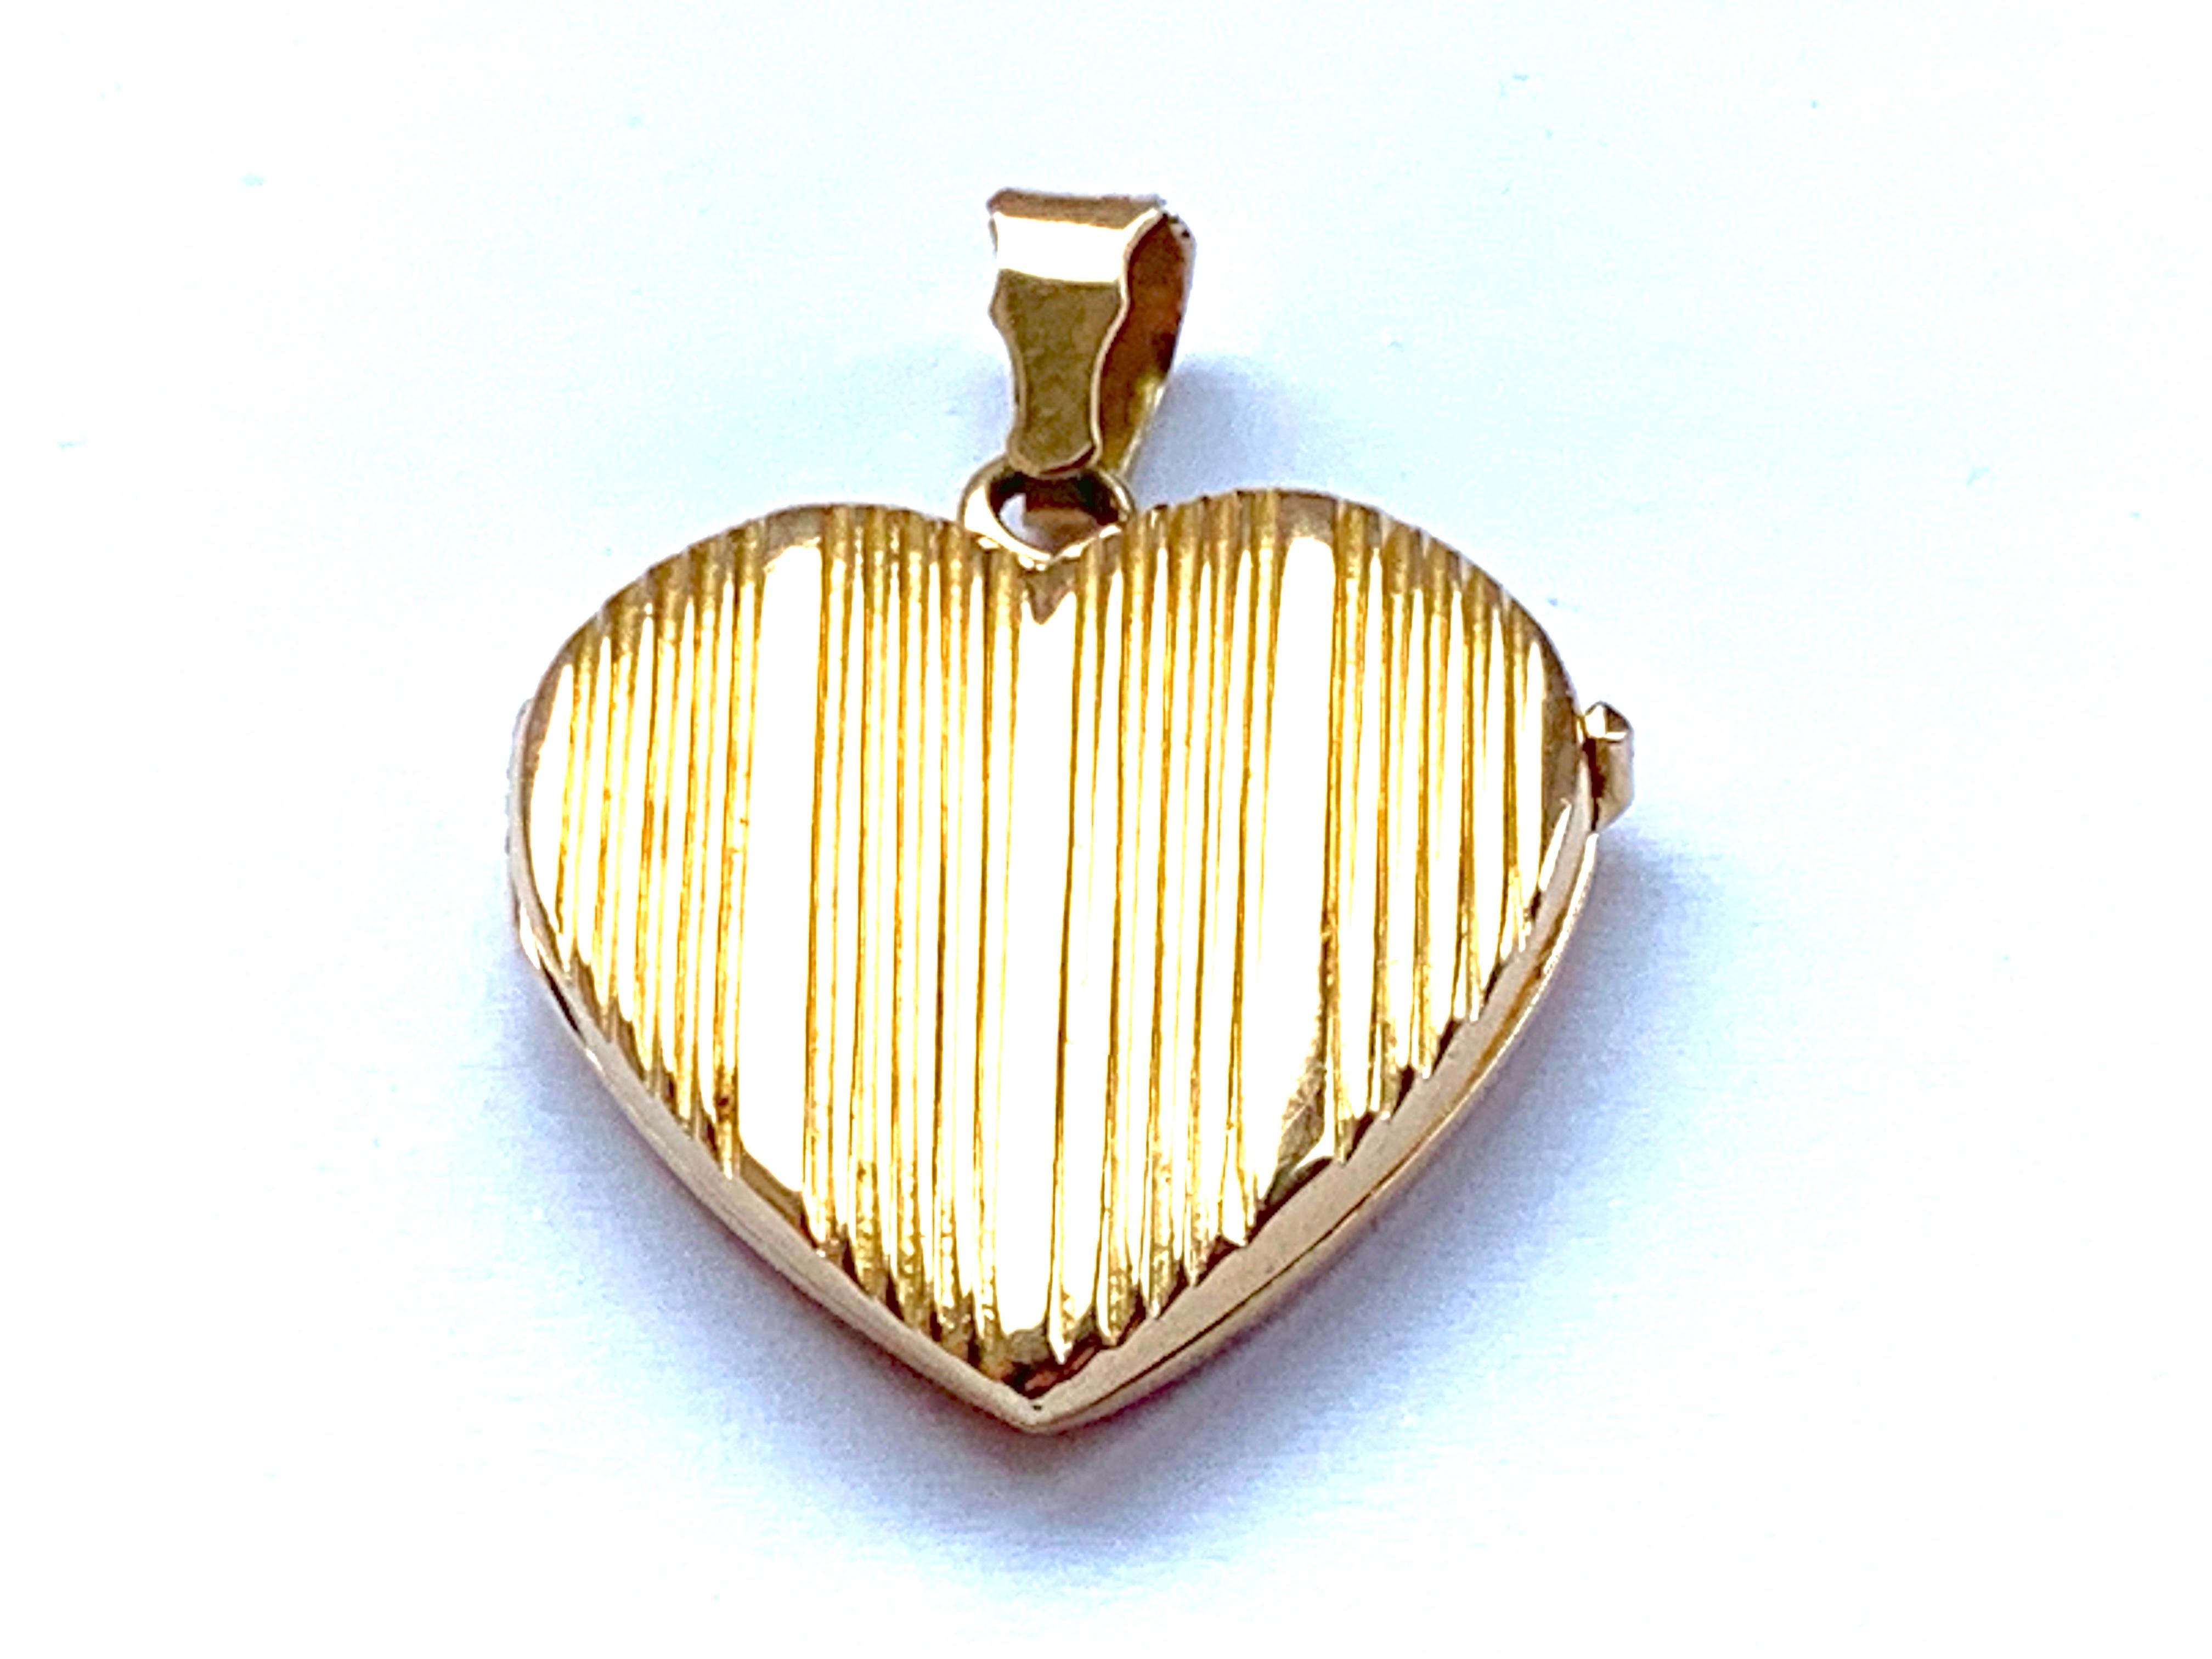 
18ct Gold Locket
with beautiful stripe design to front
and frilled edge bail .
stamped 220 VI 750 on bail
Circa 1980s
Snaps shut very securely
Size 2.5cm x 2.5 cm x 3.5mm ( not including bail )
Weight 7.7 grammes